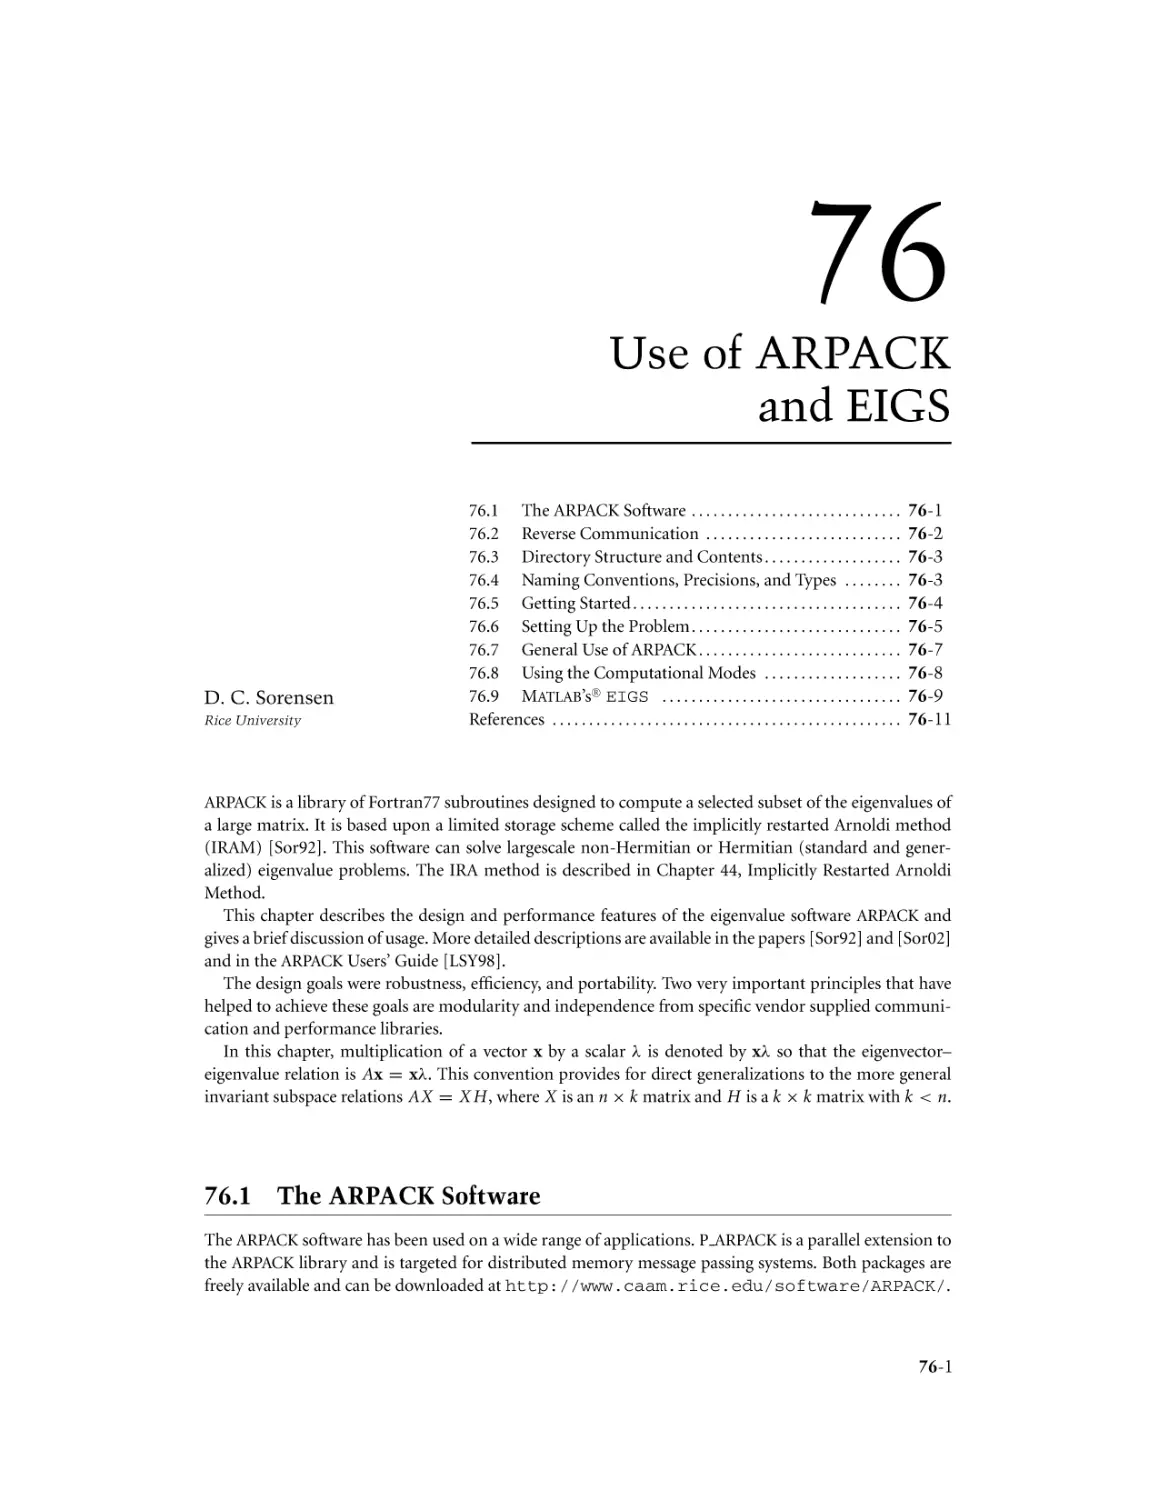 Chapter 76. Use of ARPACK and EIGS